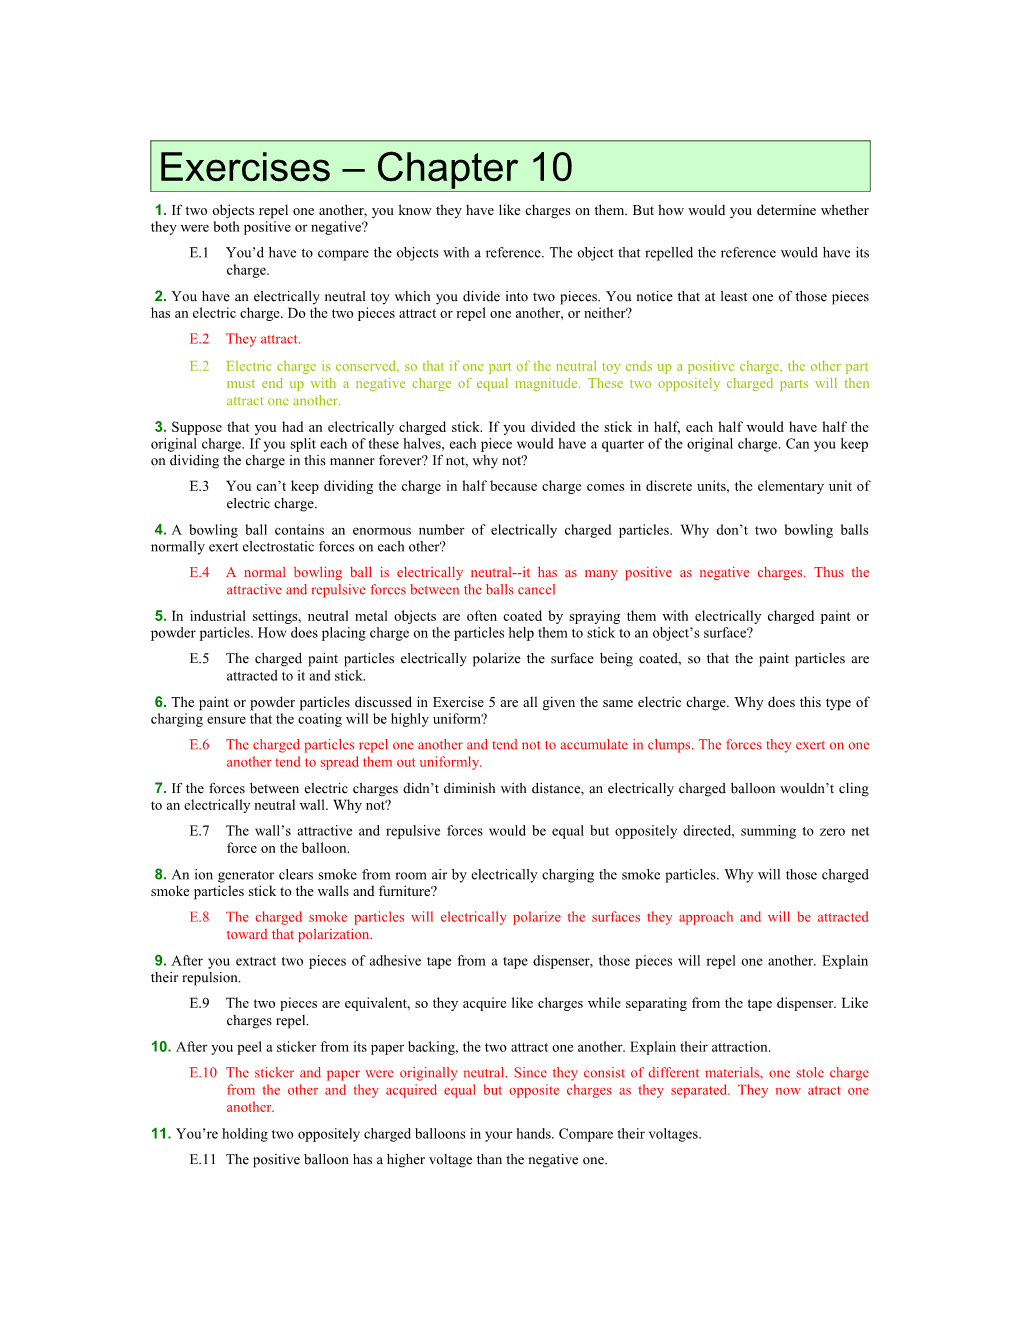 Exercises Chapter 10